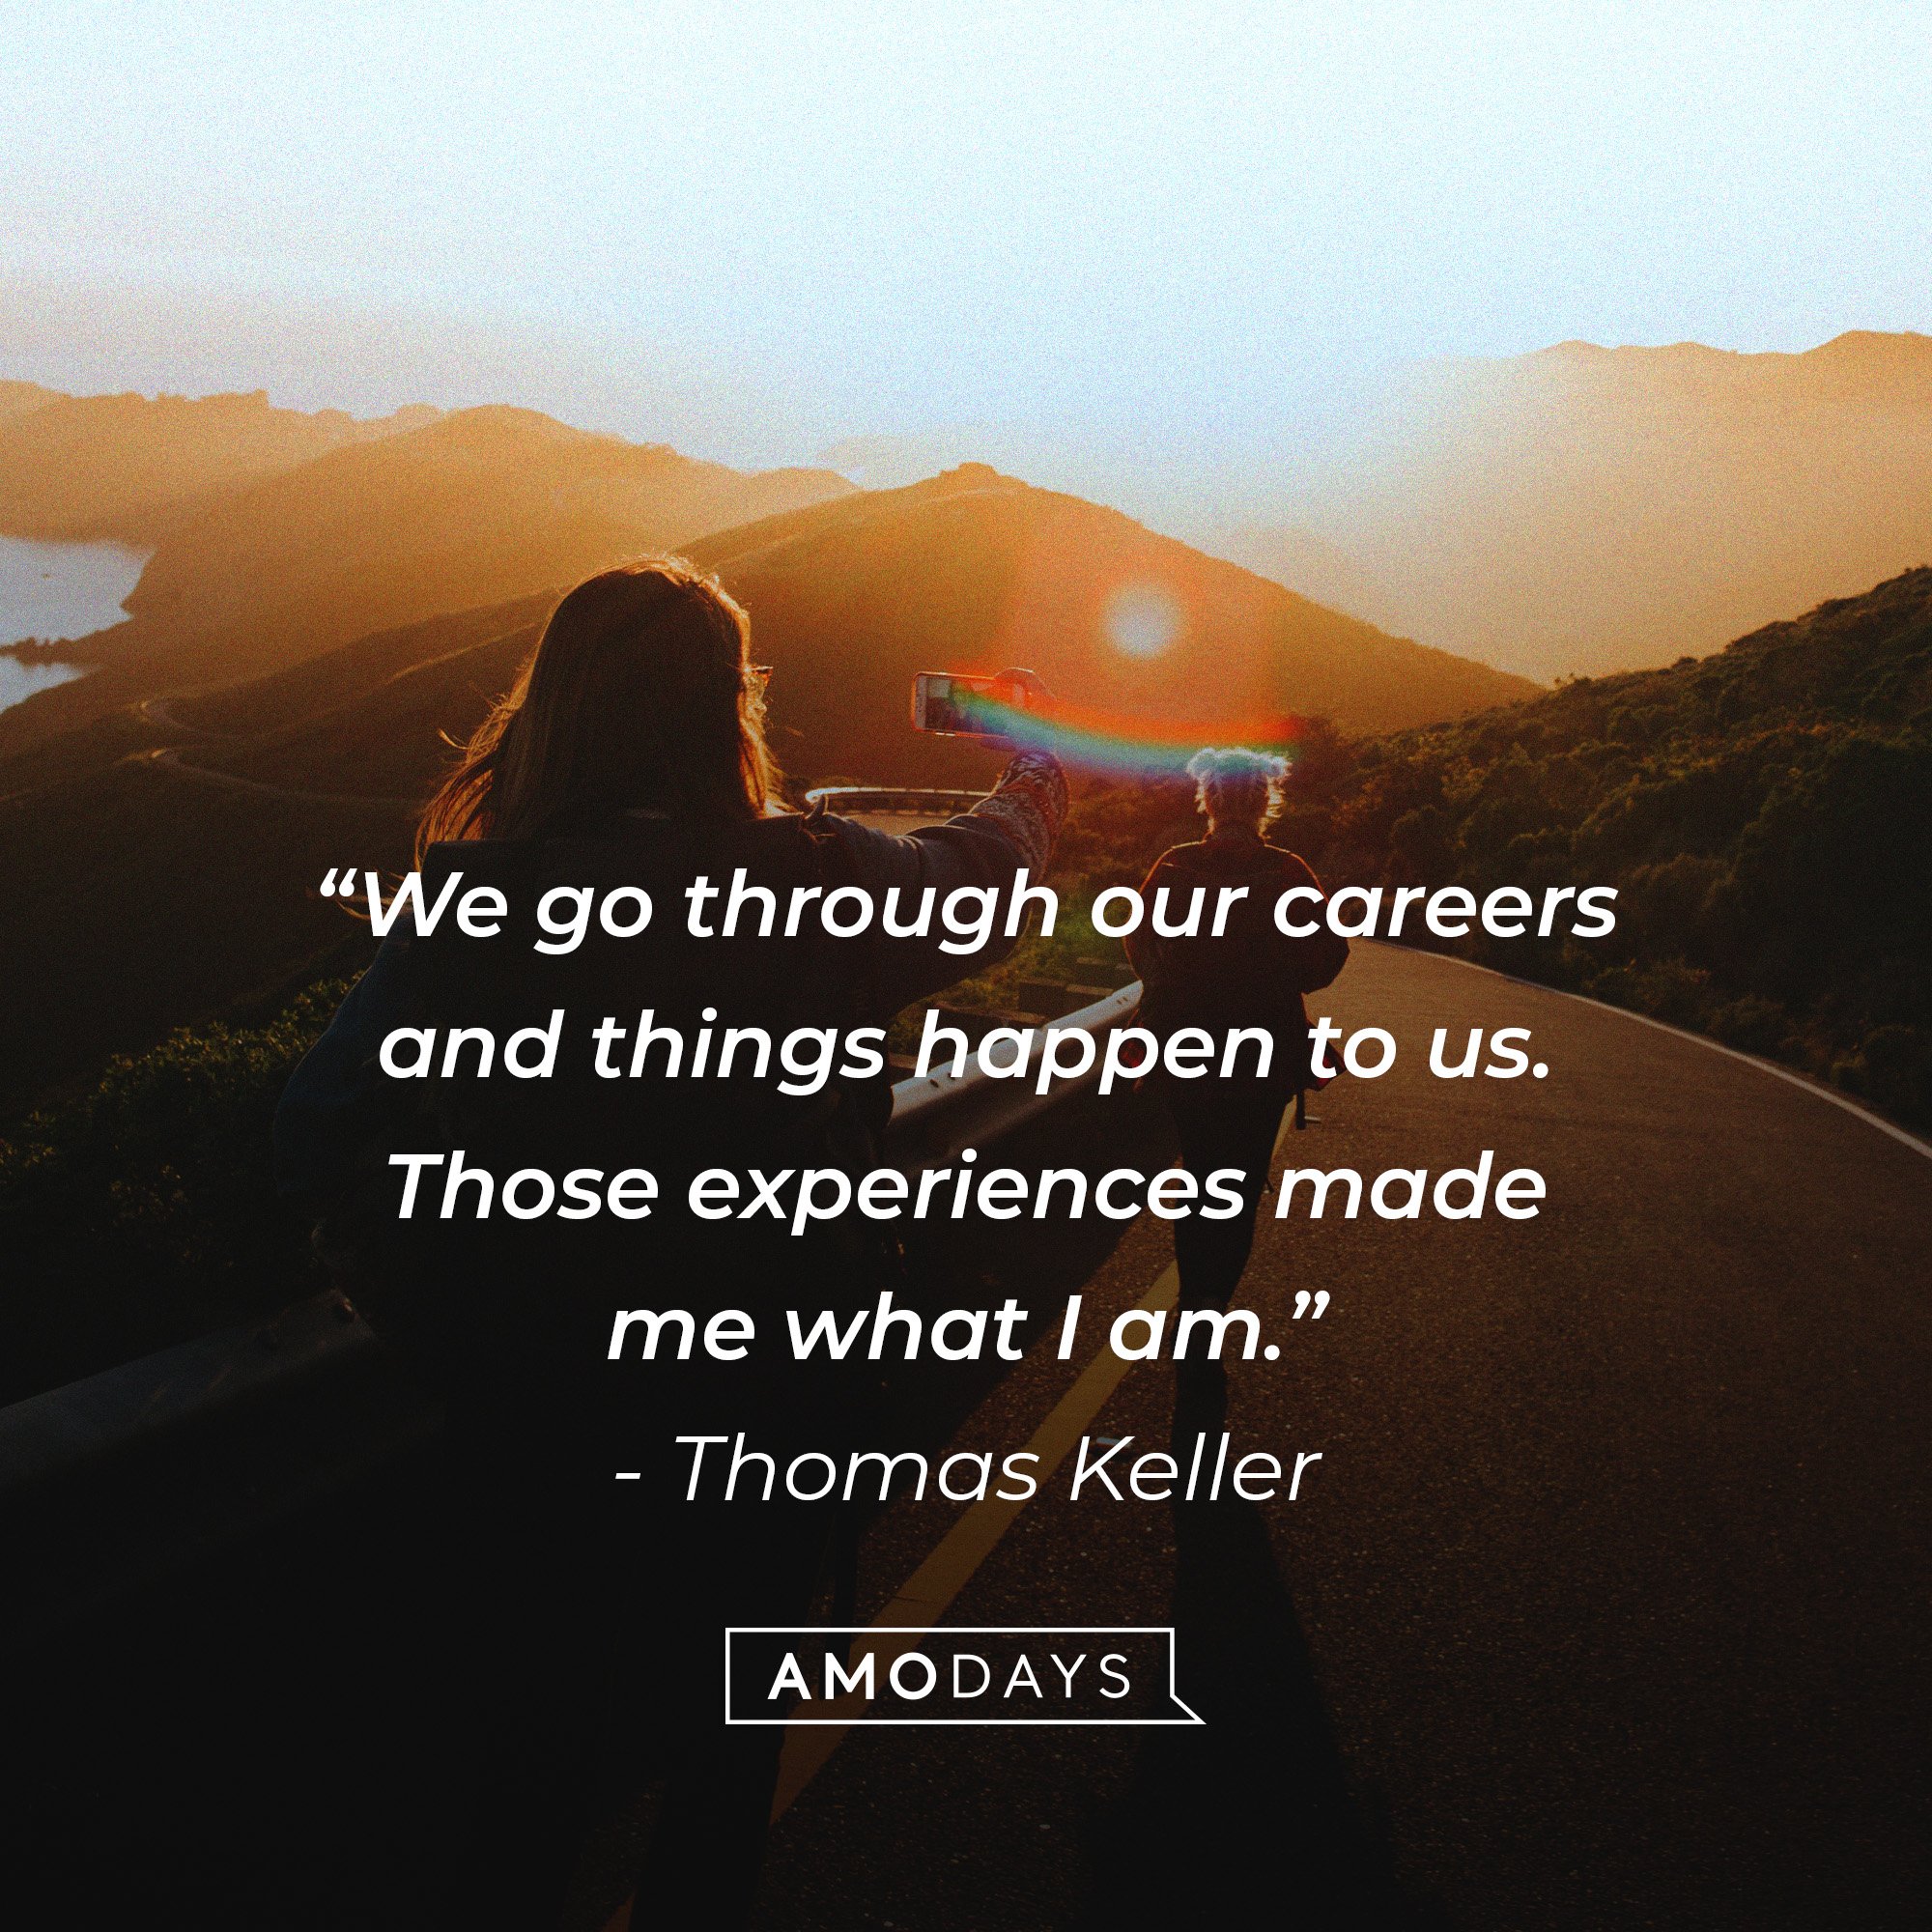 Thomas Keller's quote: “We go through our careers and things happen to us. Those experiences made me what I am.” | Image: AmoDays